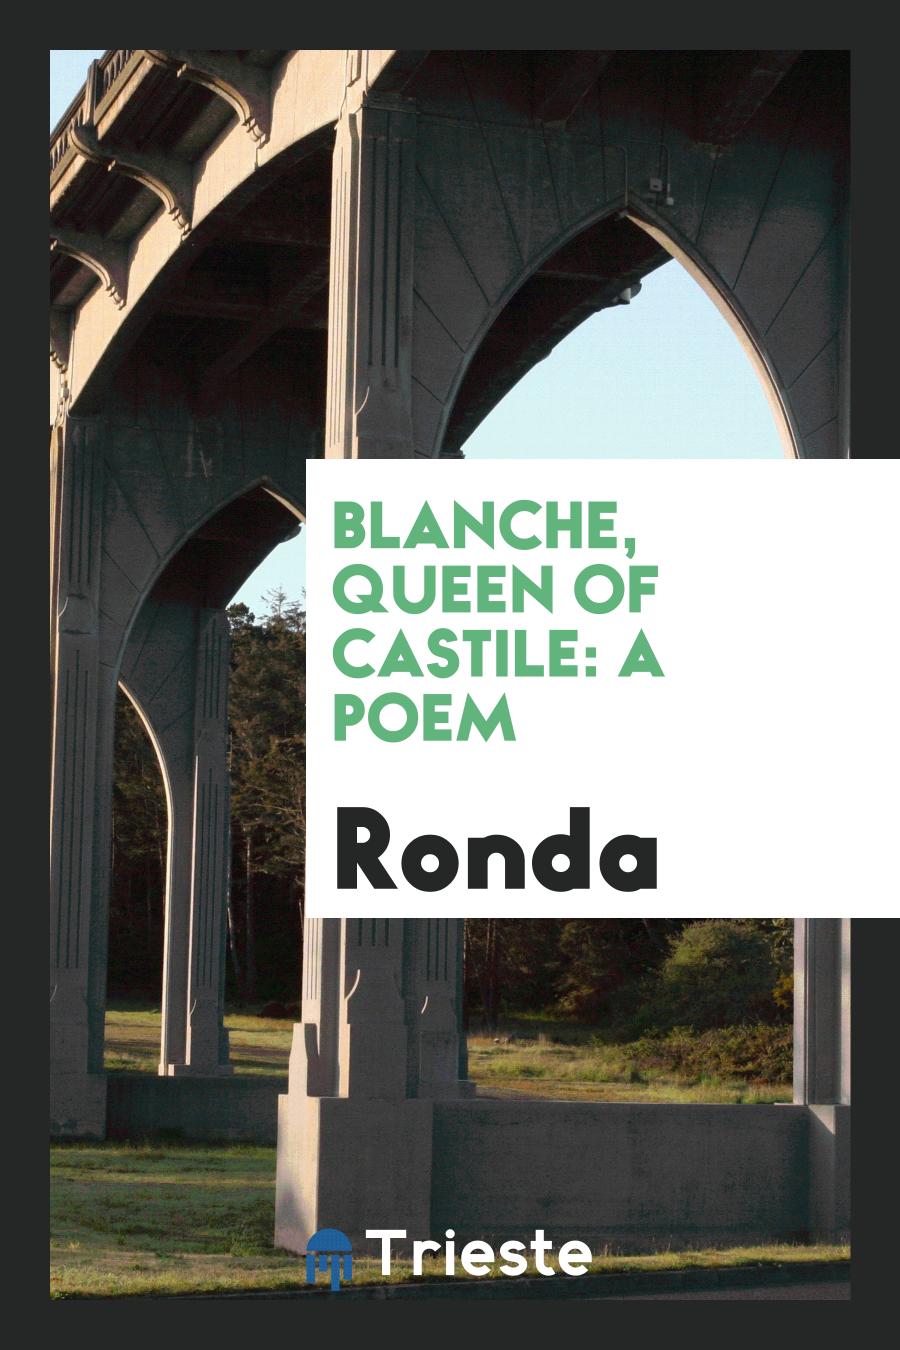 Blanche, Queen of Castile: A Poem